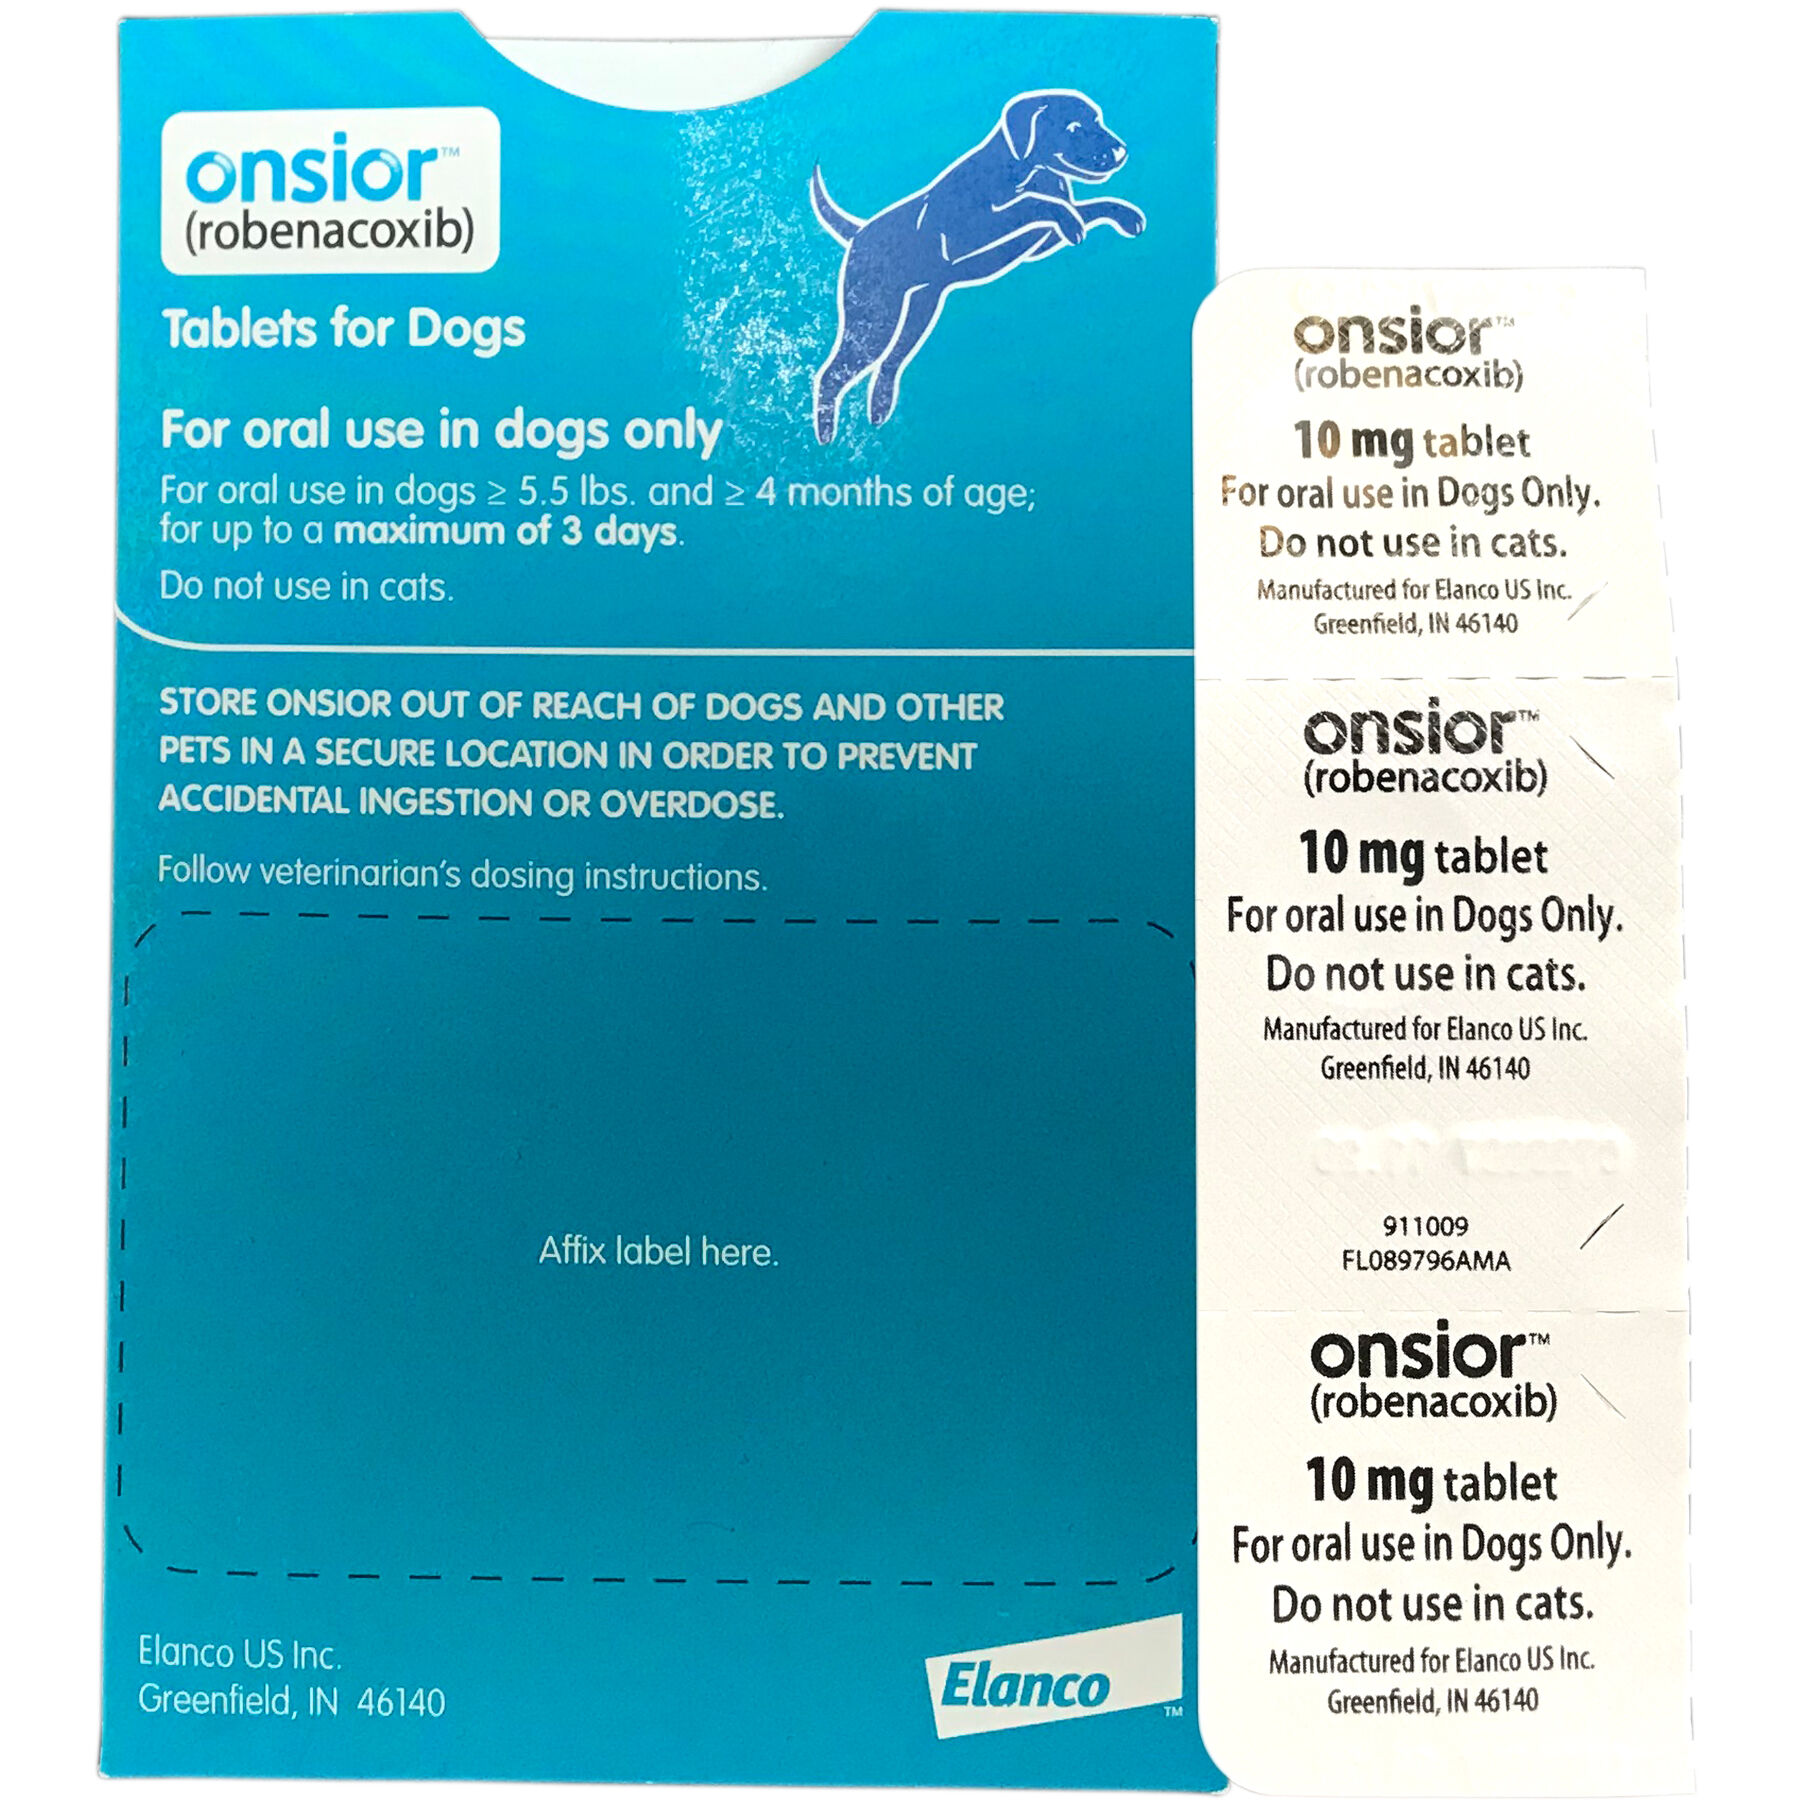 onsior for cats